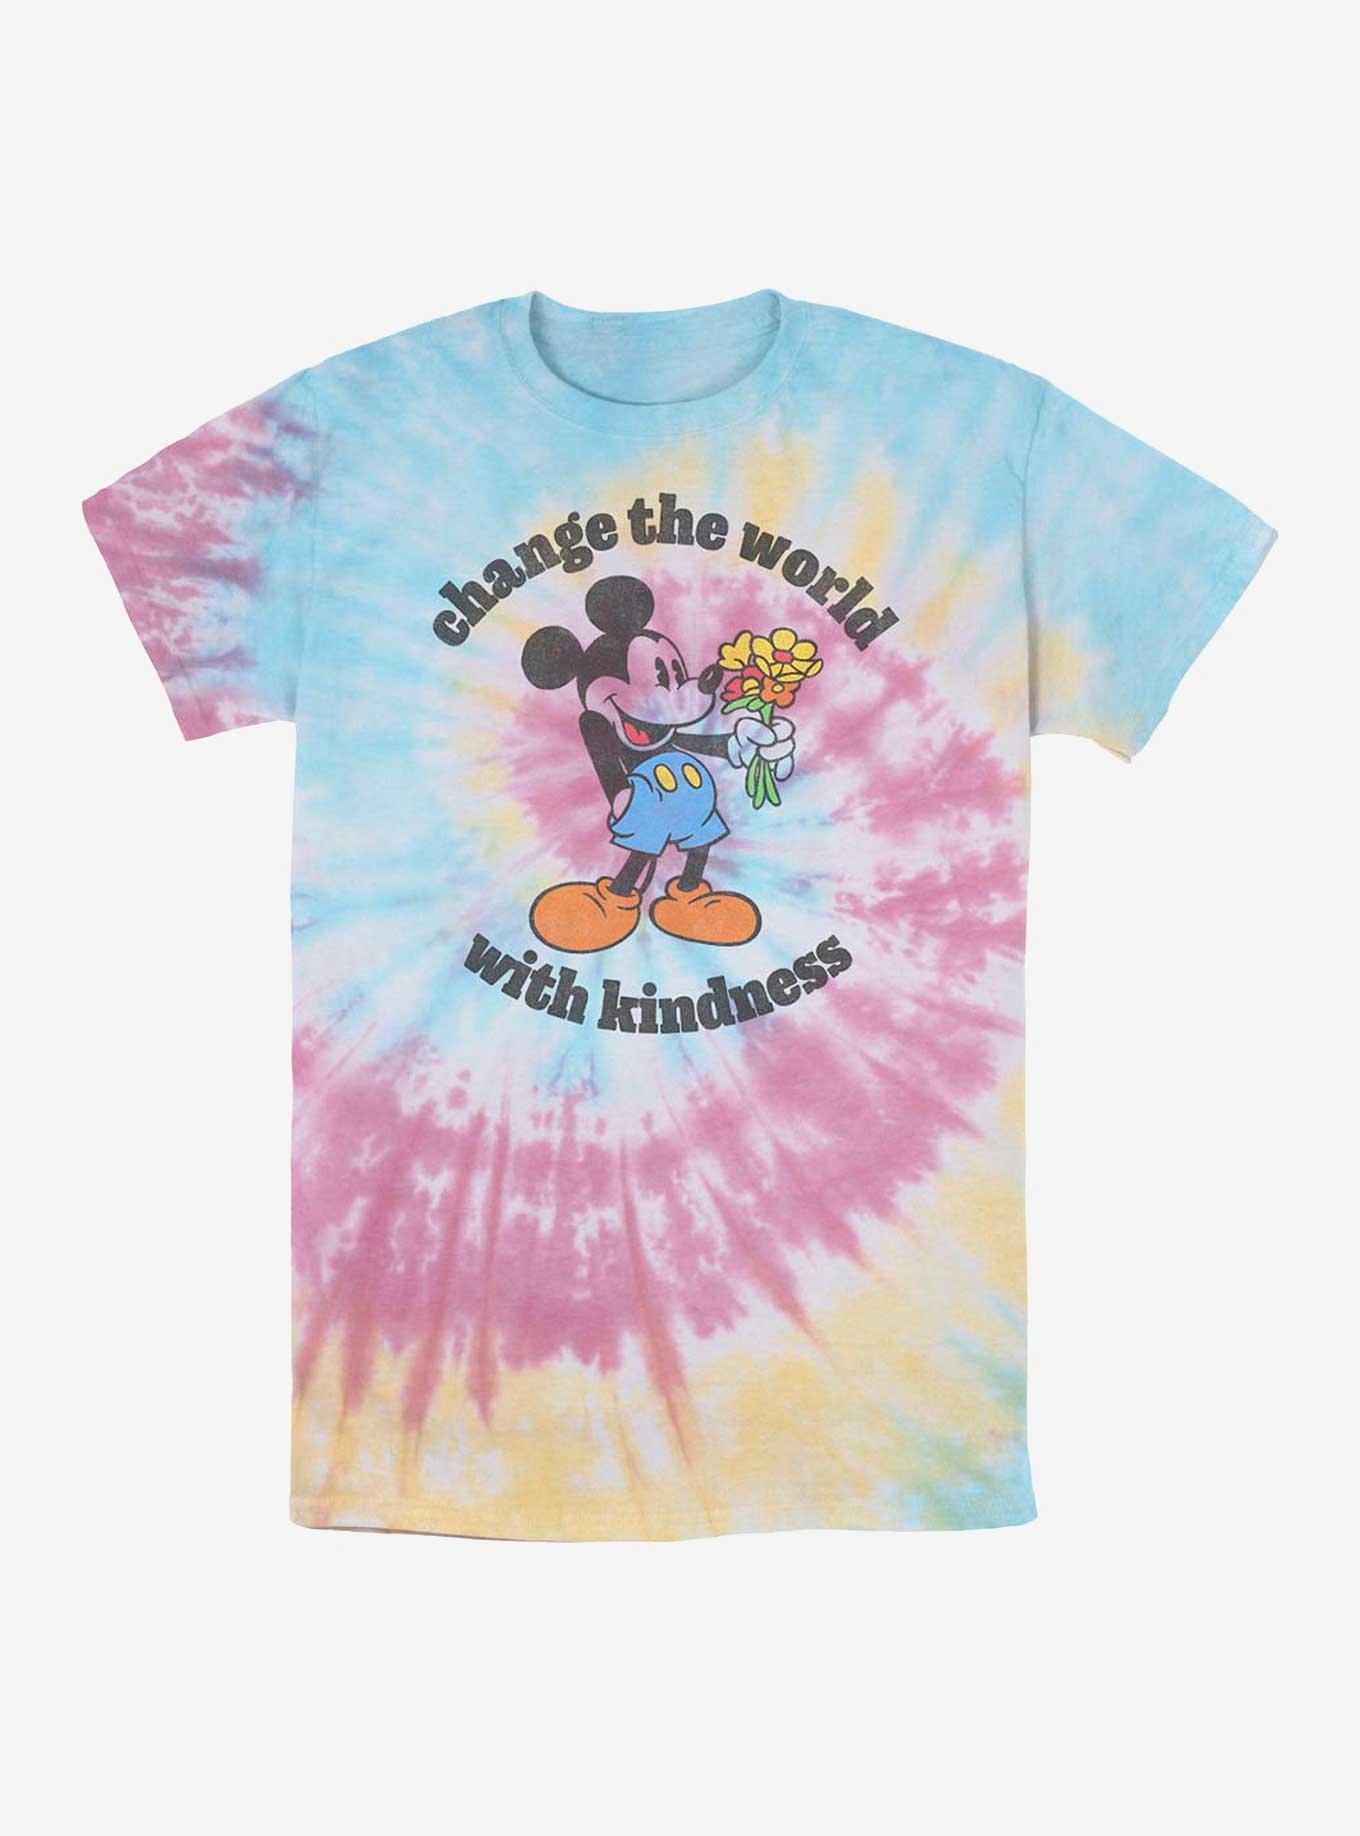 Disney Mickey Mouse Change The World With Kindness Tie-Dye T-Shirt, BLUPNKLY, hi-res